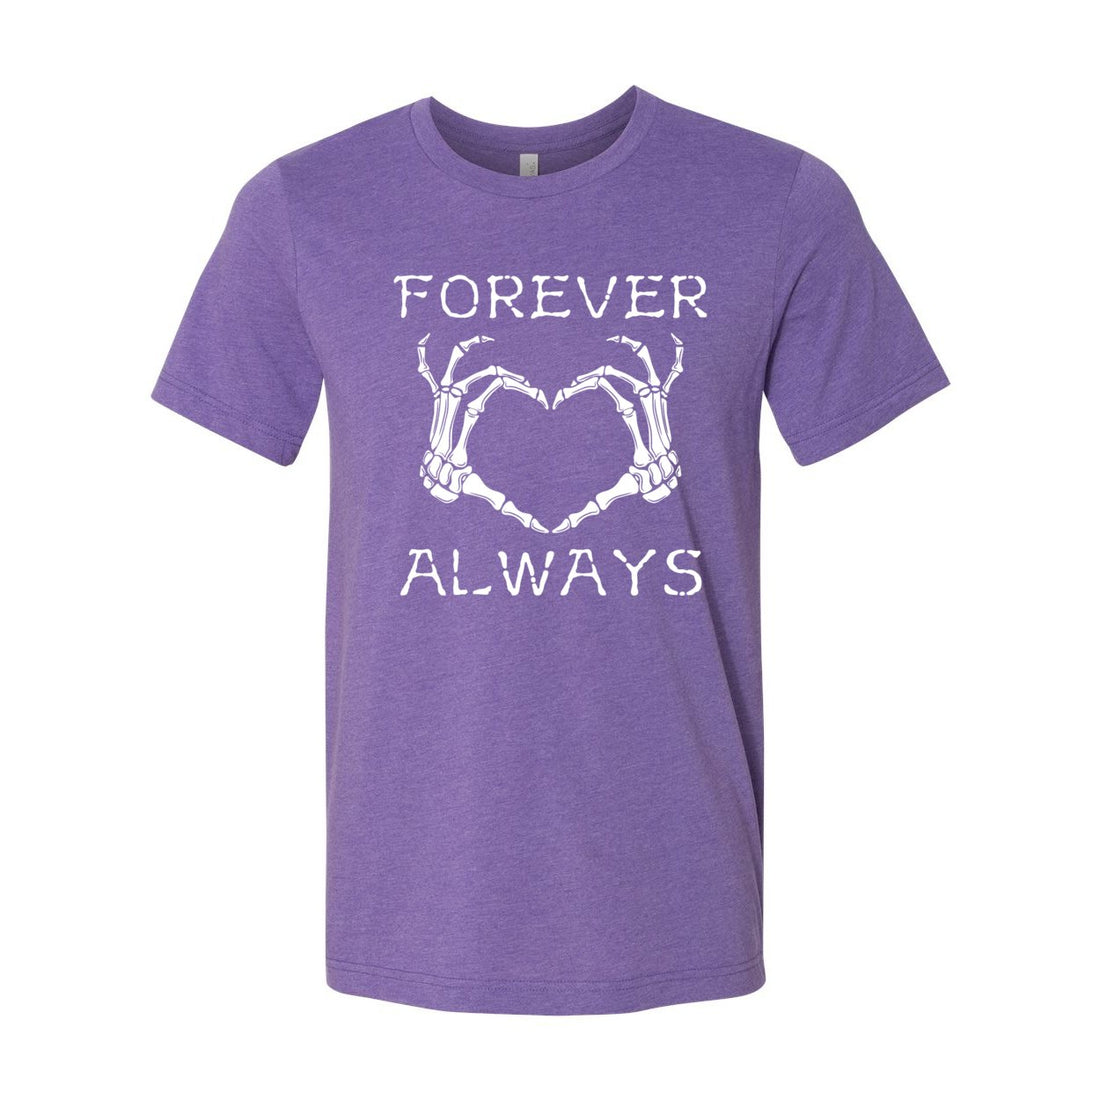 Forever and Always Sleeve Jersey Tee - T-Shirts - Positively Sassy - Forever and Always Sleeve Jersey Tee